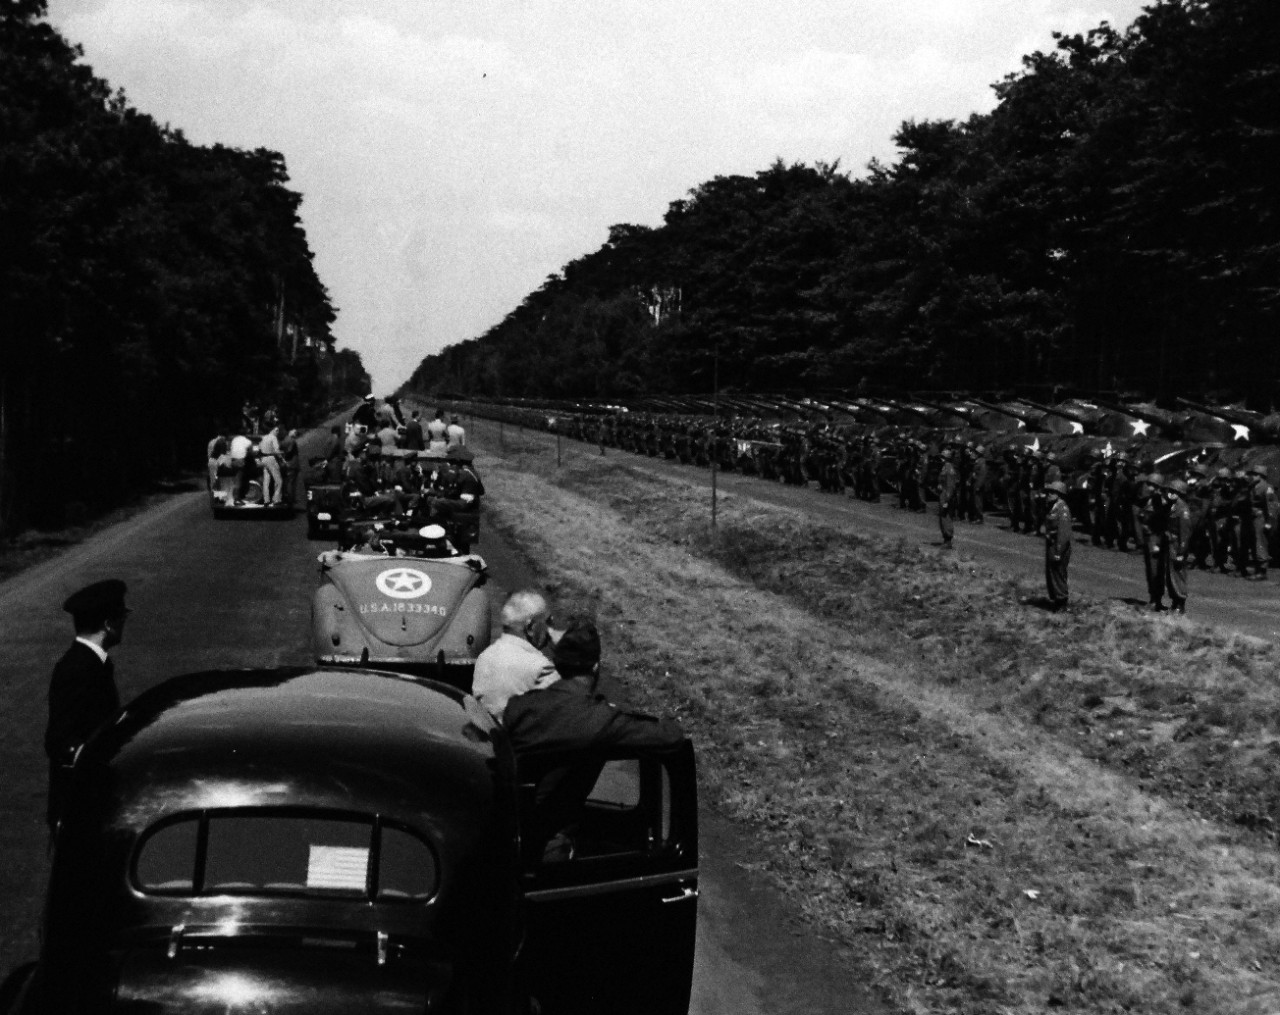 80-G-49985:  Potsdam Conference, July-August 1945.   In between conference sessions, President Harry S. Truman makes a quick tour of Berlin, Germany.   Shown: On the outskirts of the city, he inspects the Second Armored Division.  Shortly following this inspection, he presented the Division with the Presidential Unit Citation.  Photographed by CPhoM Wm. Belknap, received July 16, 1945.  Official U.S. Navy Photograph, now in the collections of the National Archives.  (2016/02/23).